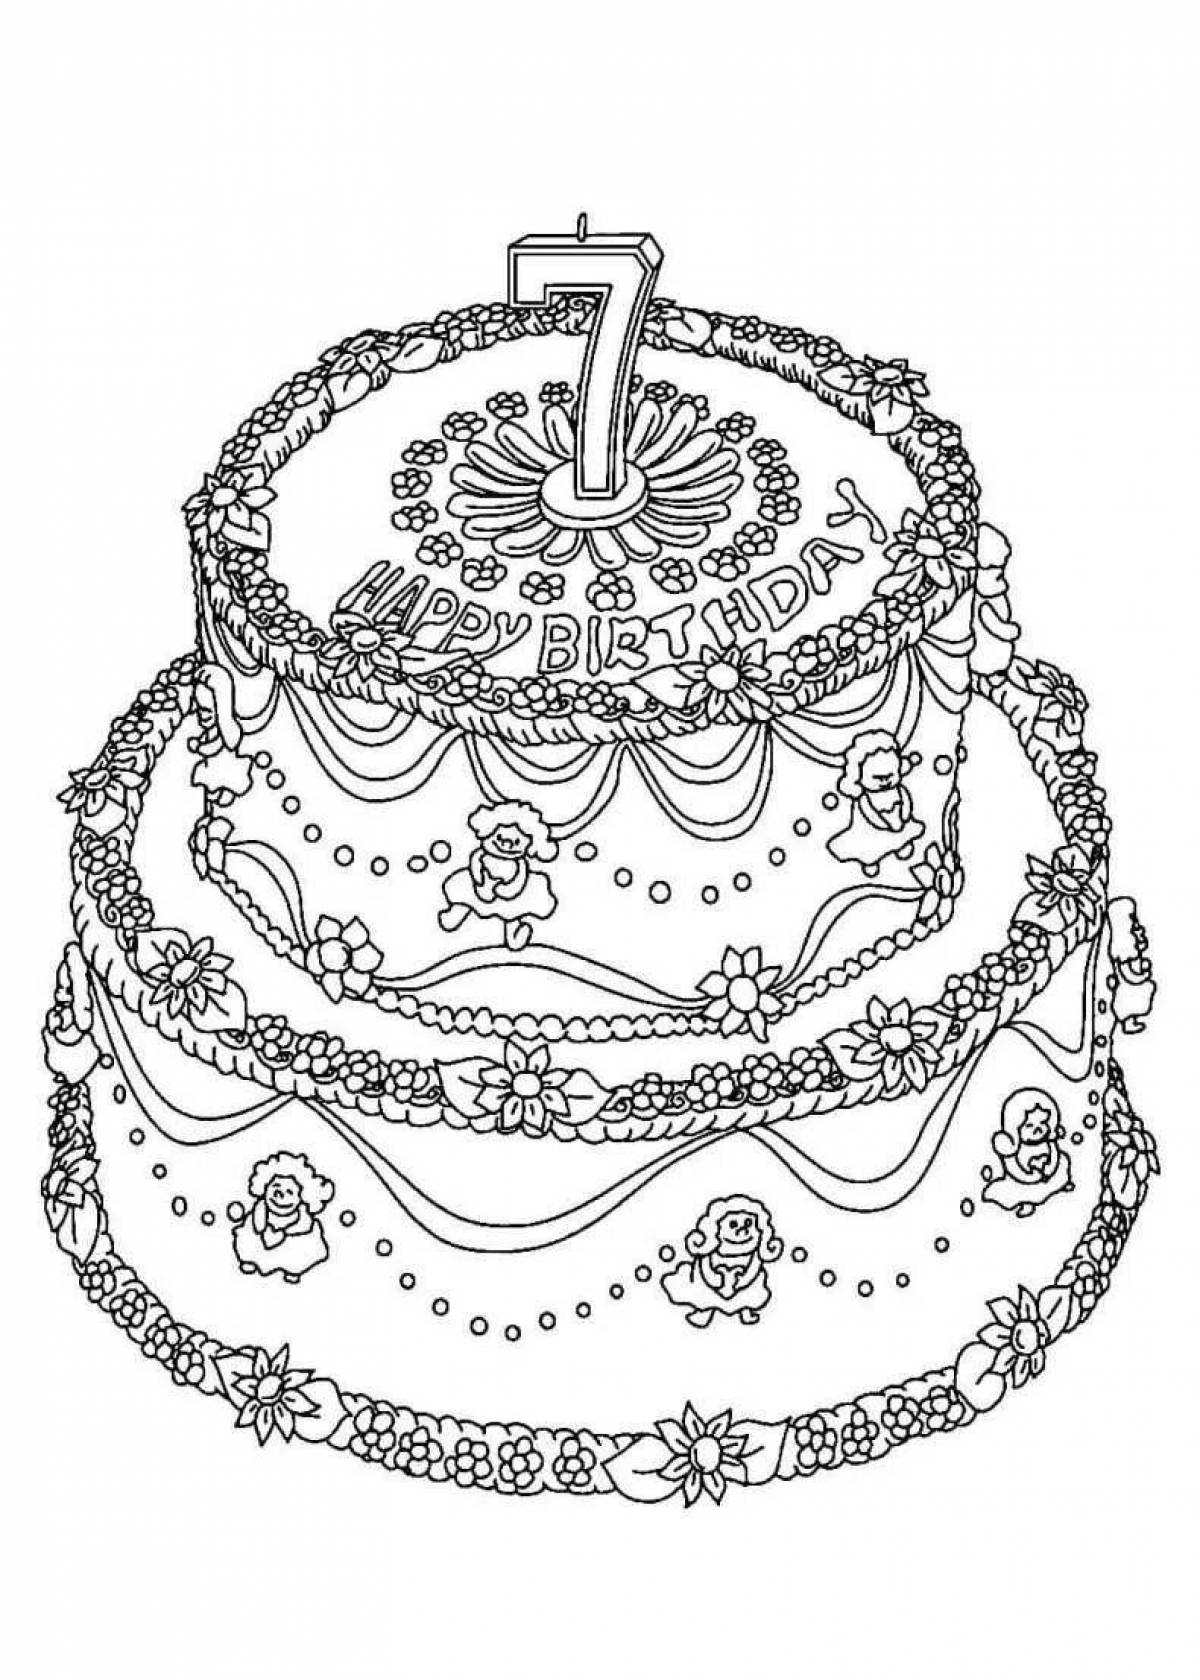 Colored birthday cake coloring book